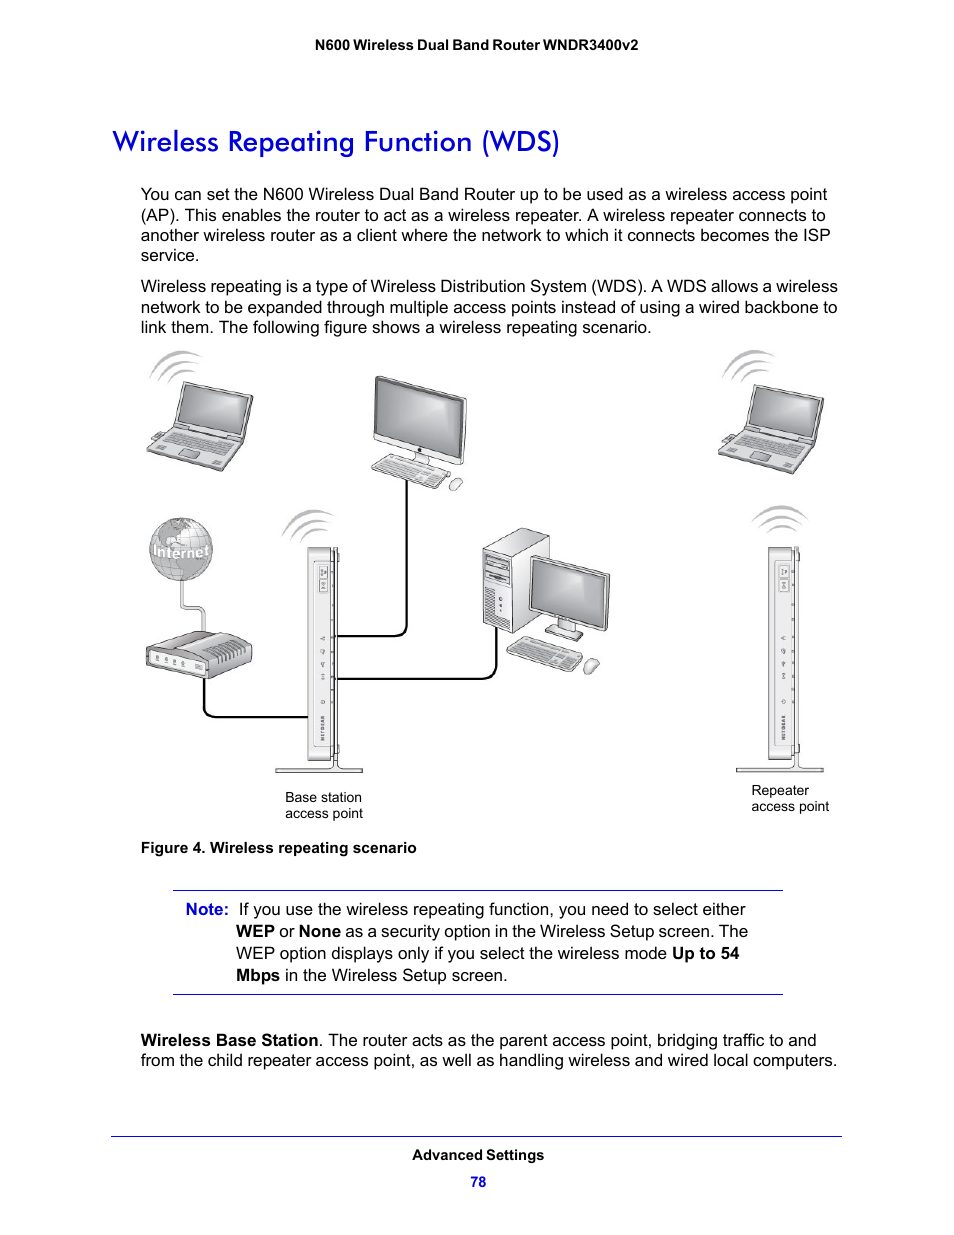 Wireless repeating function (wds) | NETGEAR N600 Wireless Dual Band Router  WNDR3400v2 User Manual | Page 78 / 120 | Original mode